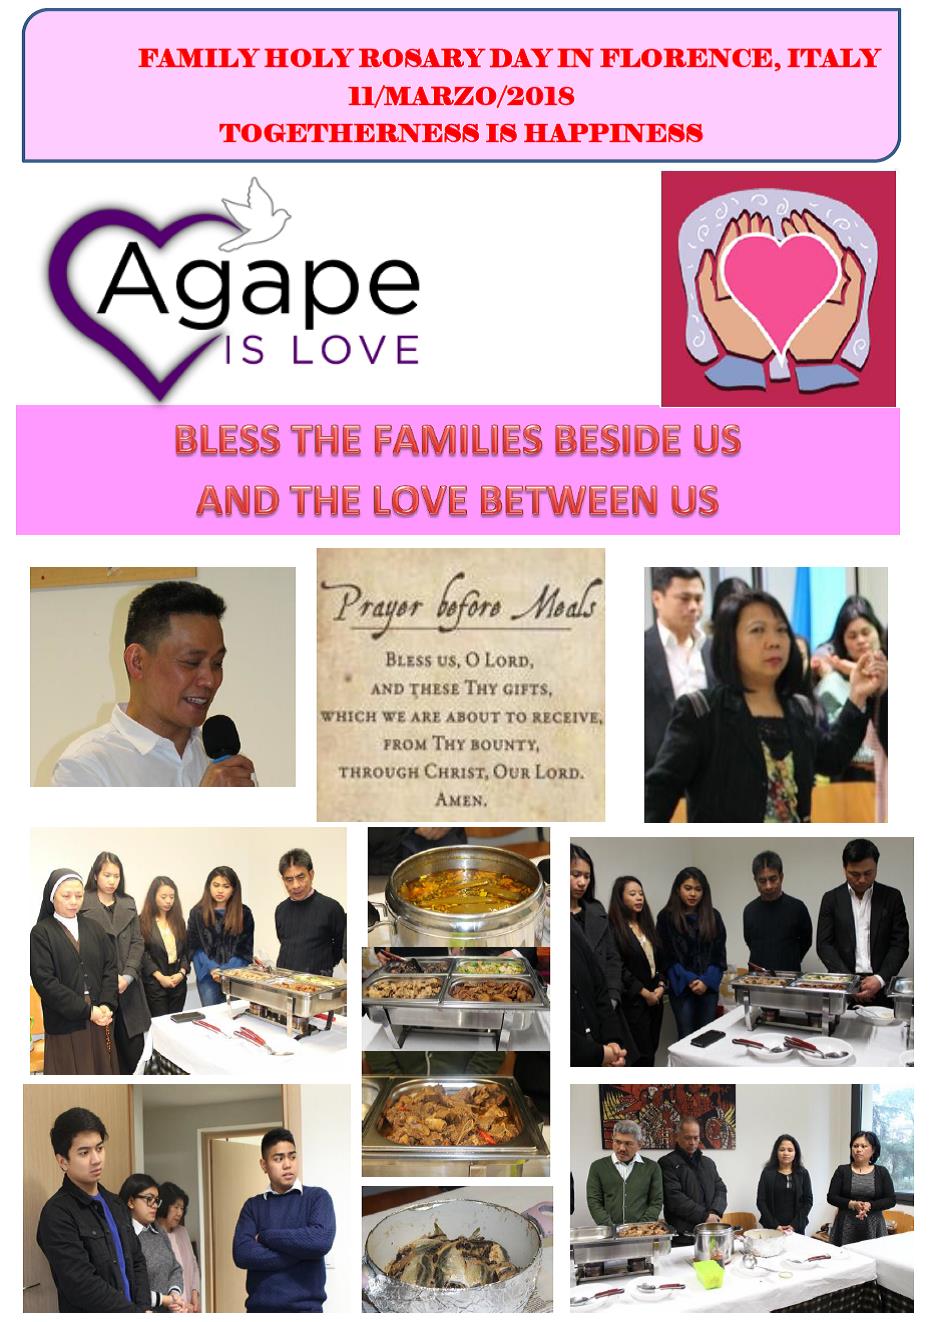 FAMILY HOLY ROSARY - AGAPE MARCH 2018